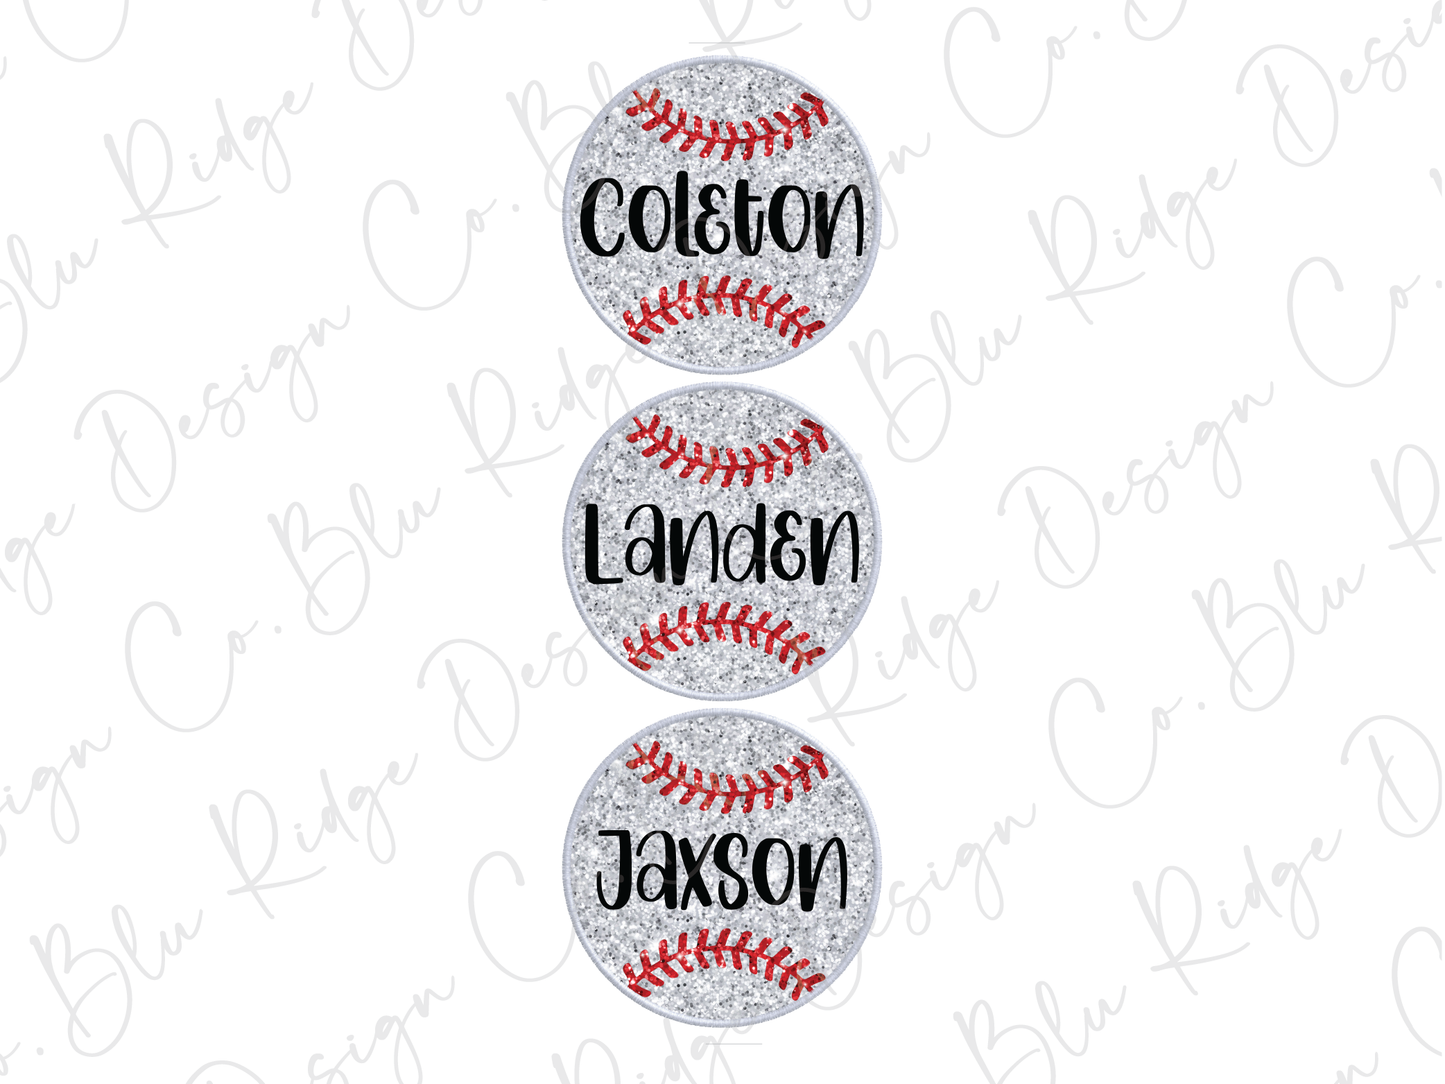 three personalized baseballs with the name of each player